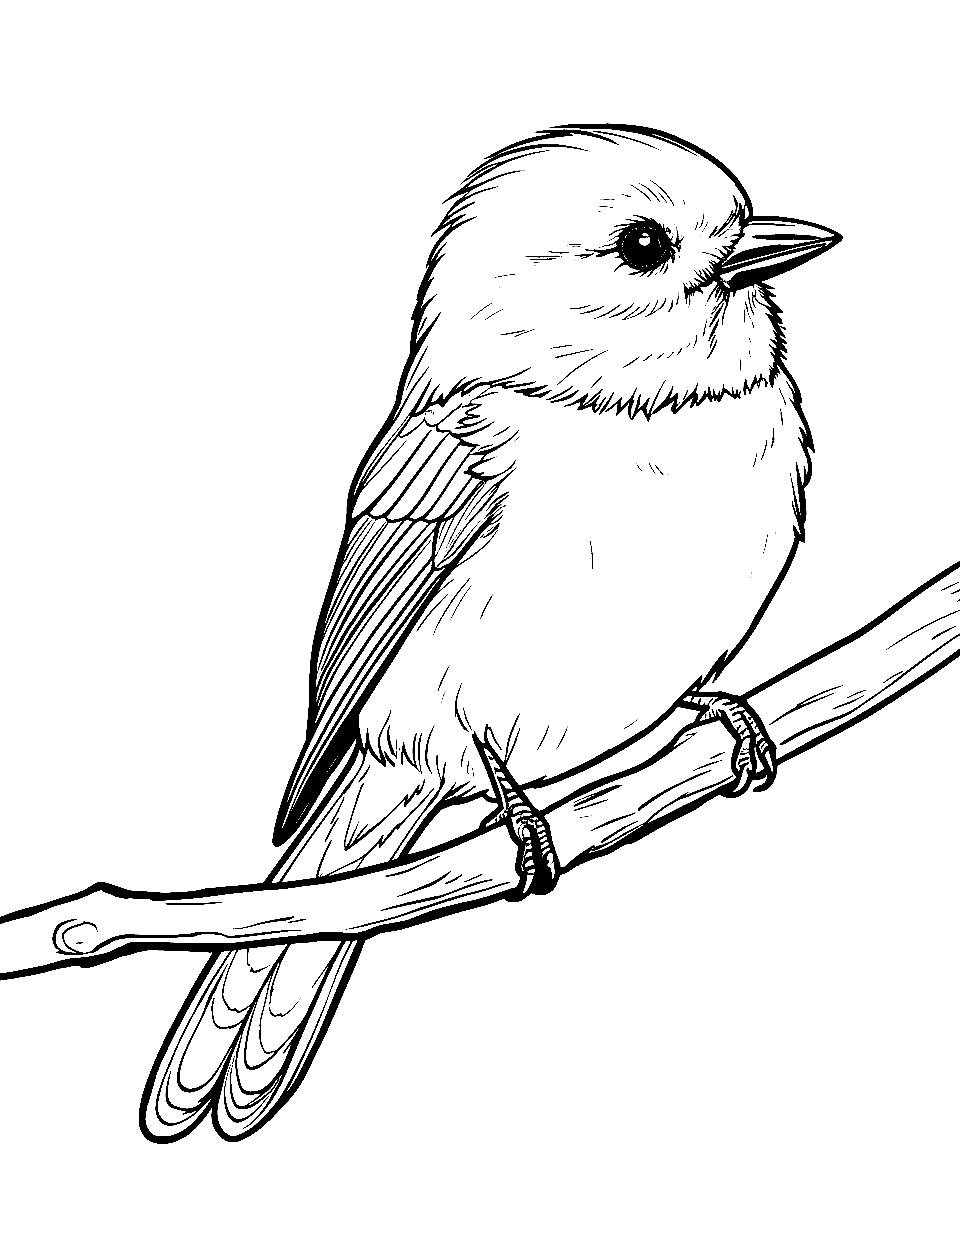 Curious Chickadee Coloring Page - A chickadee tilting its head with a look of curiosity.